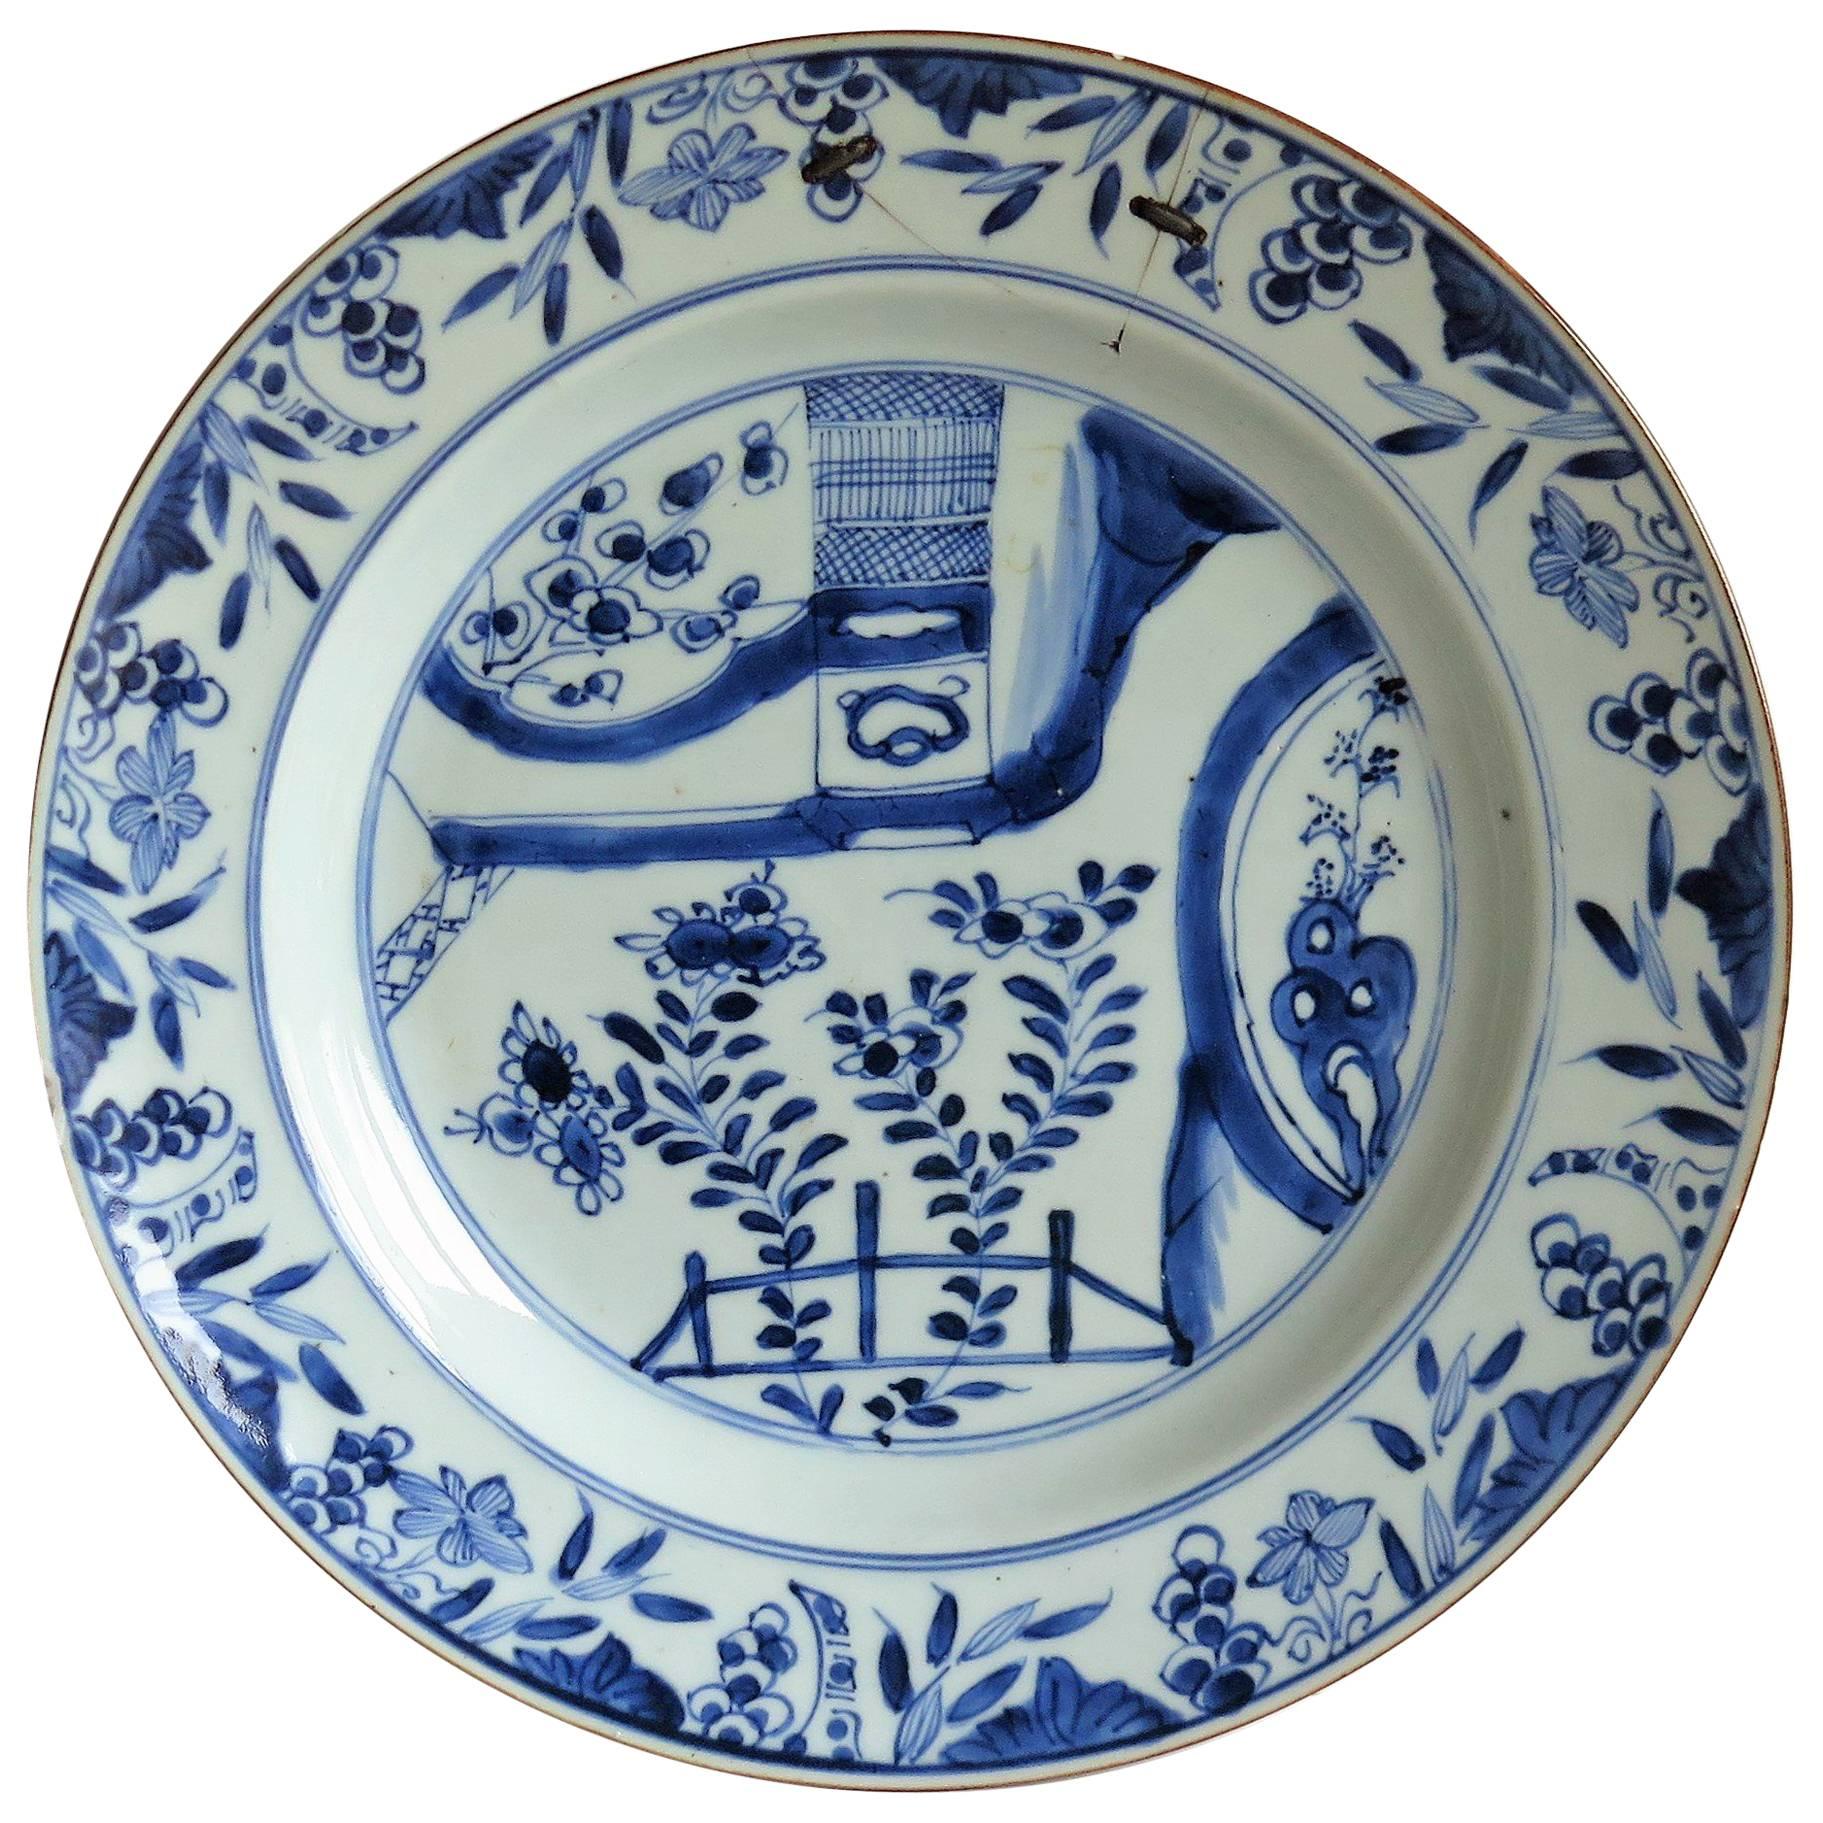 Large 18thC. Chinese Plate Porcelain Blue and White Rivet Repair, Qing Ca. 1720